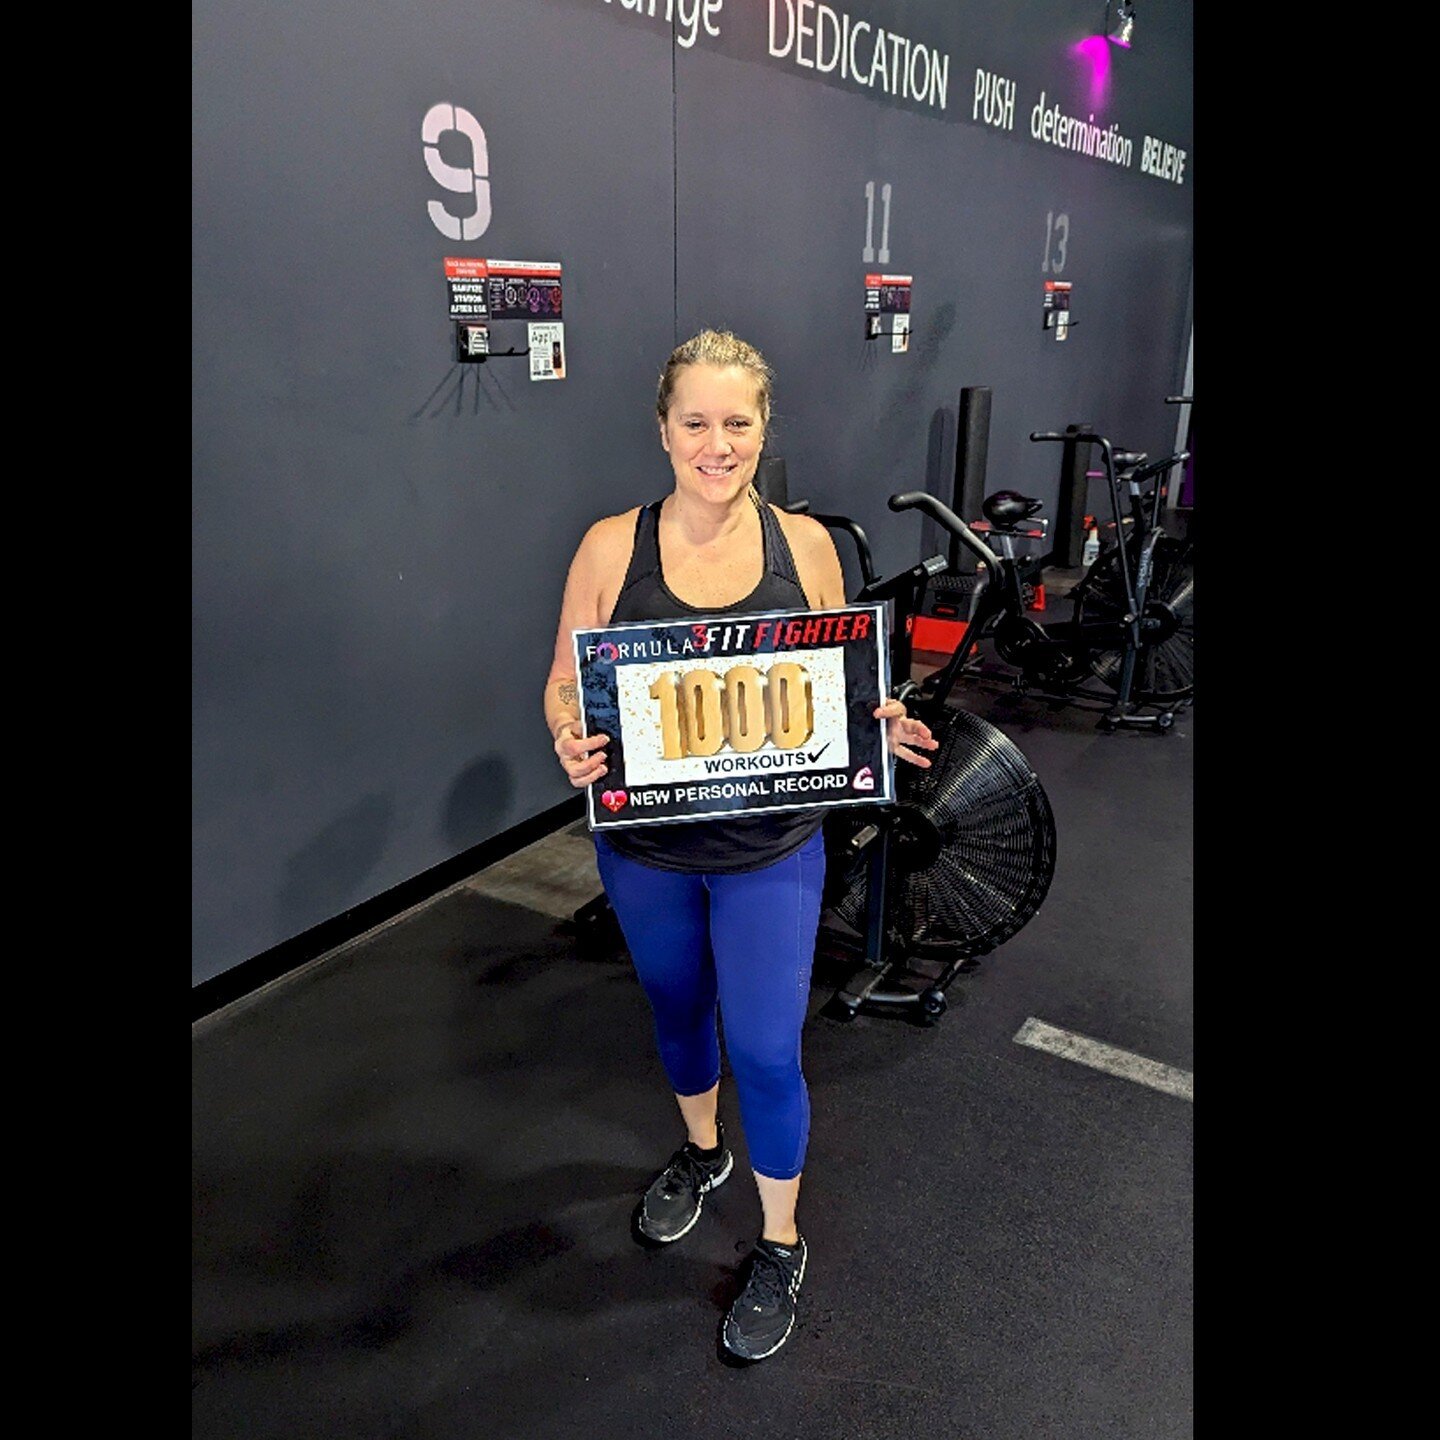 💫 🤩1,000 Workouts STRONG! Jenn Hits a Major Milestone at Lancaster! 🥳

We're kicking off the week with a HUGE shoutout to Jenn who just CRUSHED her 1,000th workout here at Lancaster! 🙌 🎉 💪

As a founding member, Jenn's dedication and perseveran